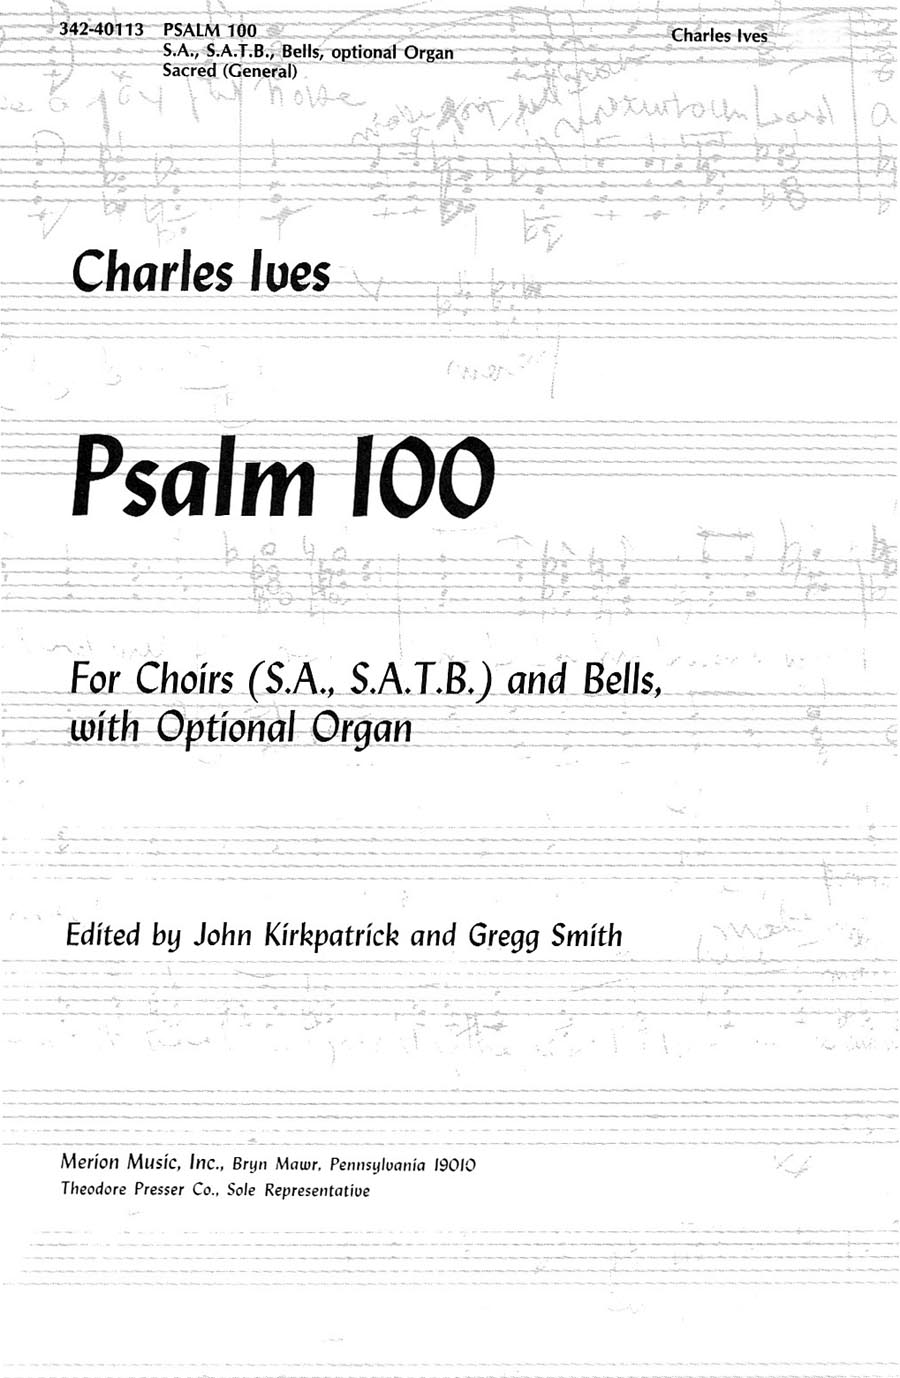 Ives: Psalm 100